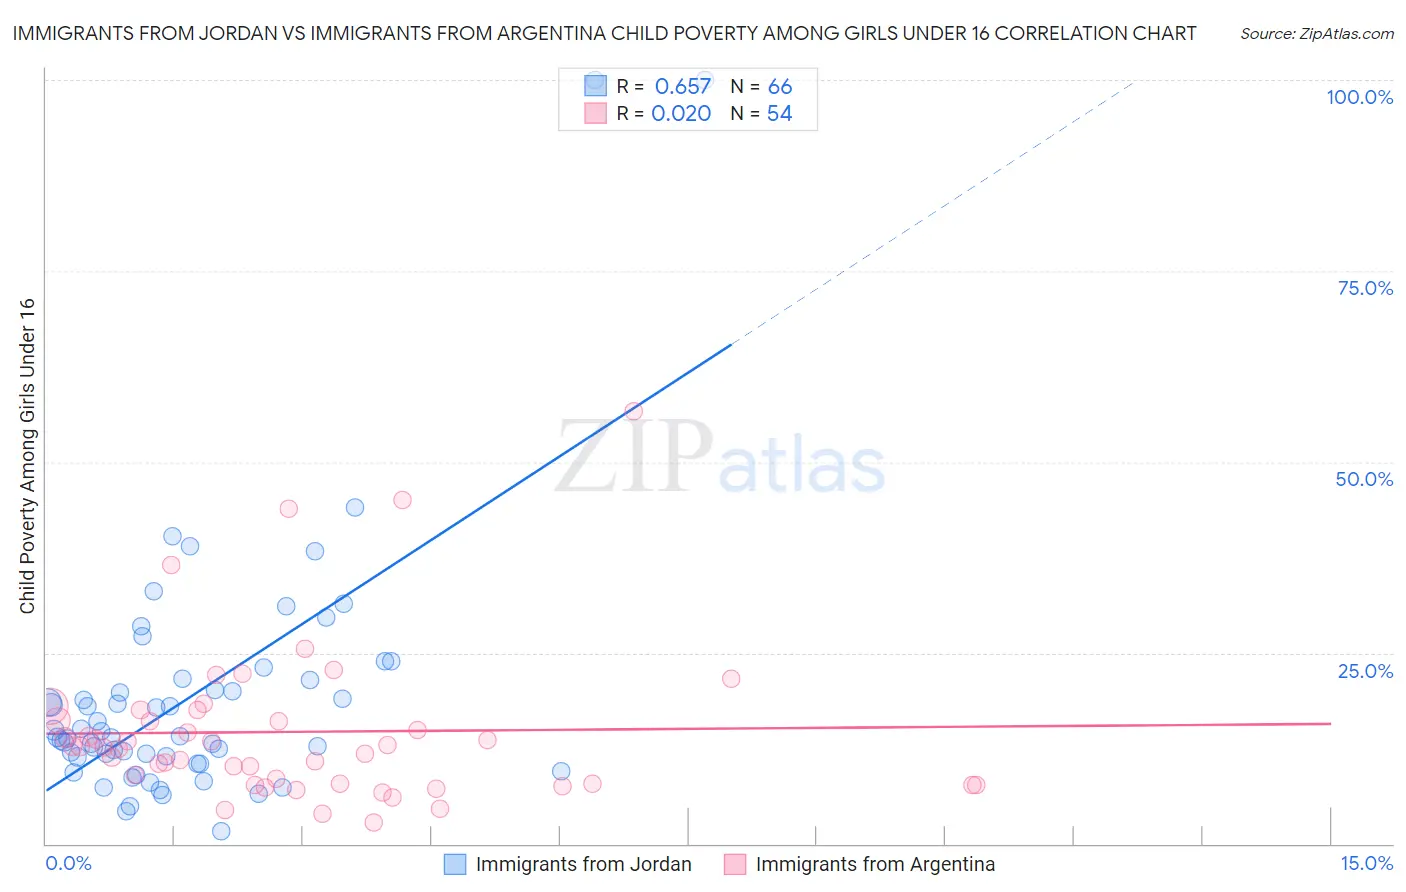 Immigrants from Jordan vs Immigrants from Argentina Child Poverty Among Girls Under 16